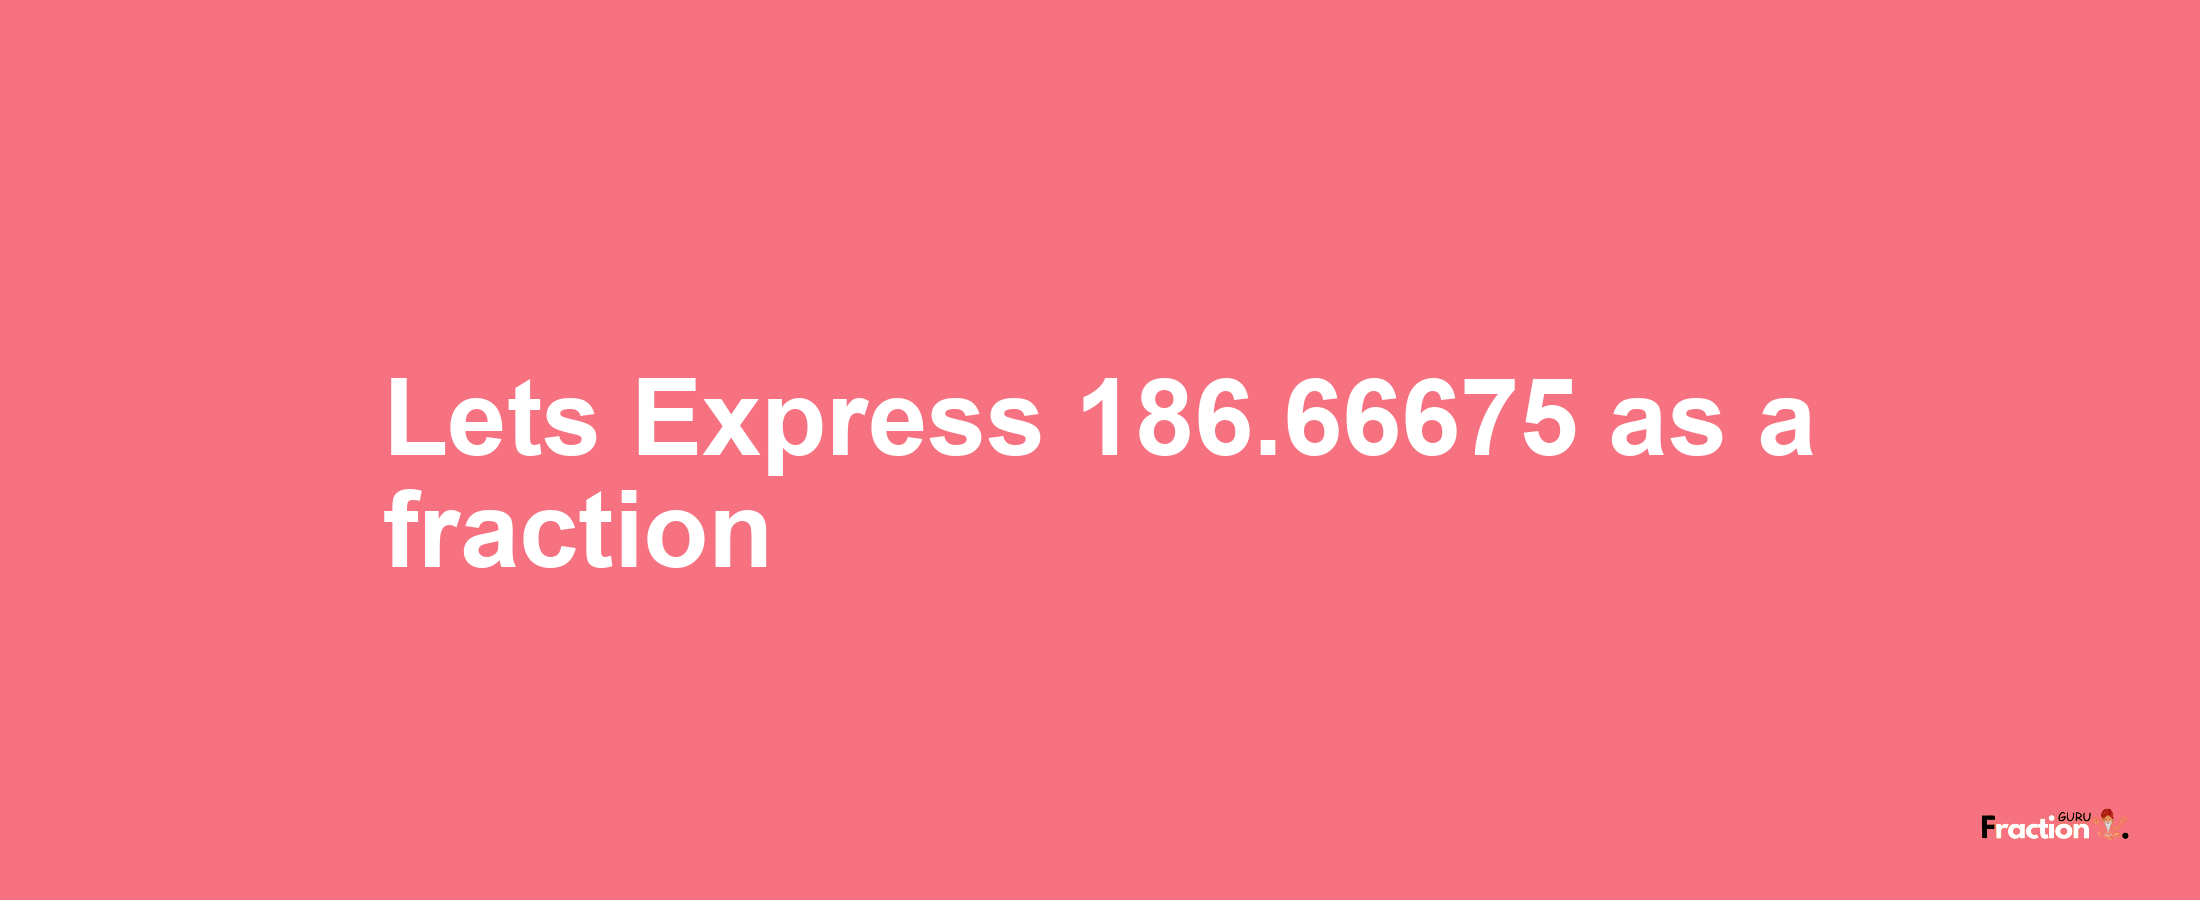 Lets Express 186.66675 as afraction